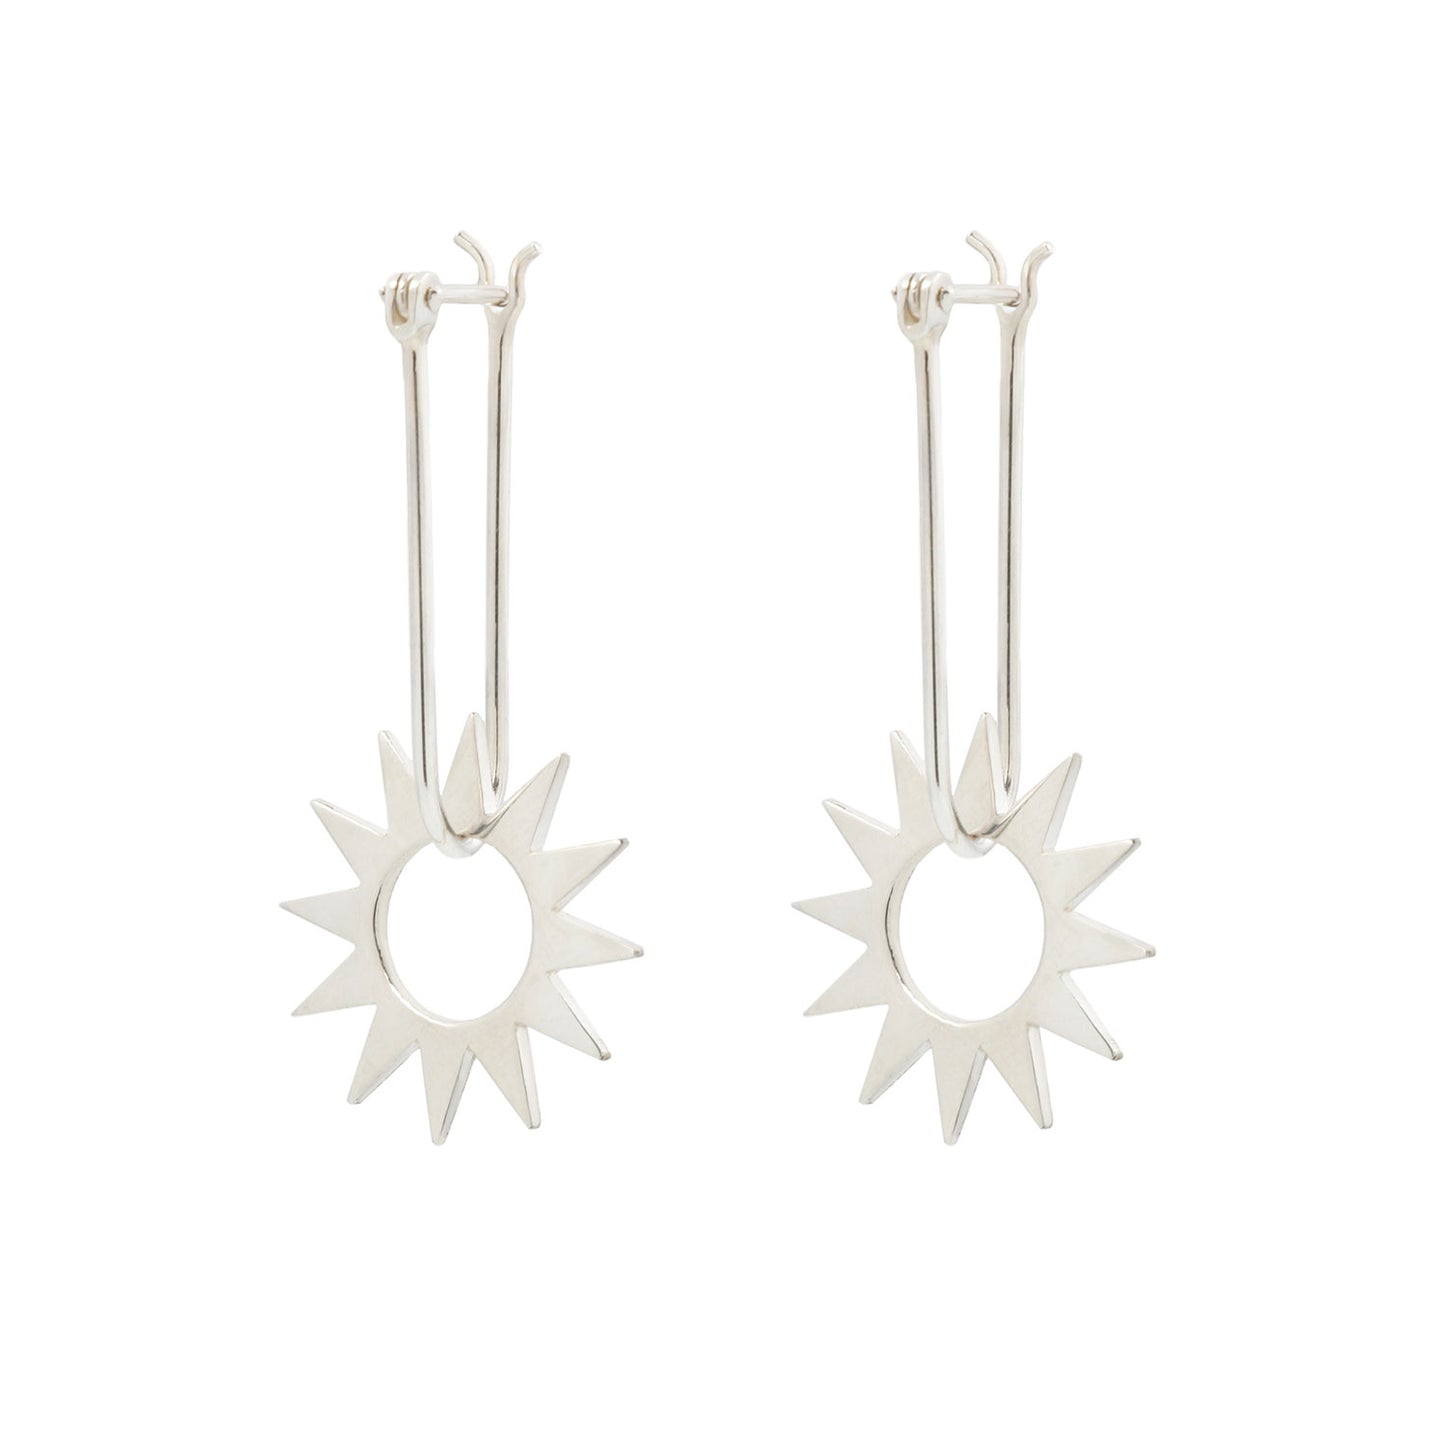 Latch and Spur Silver Earrings